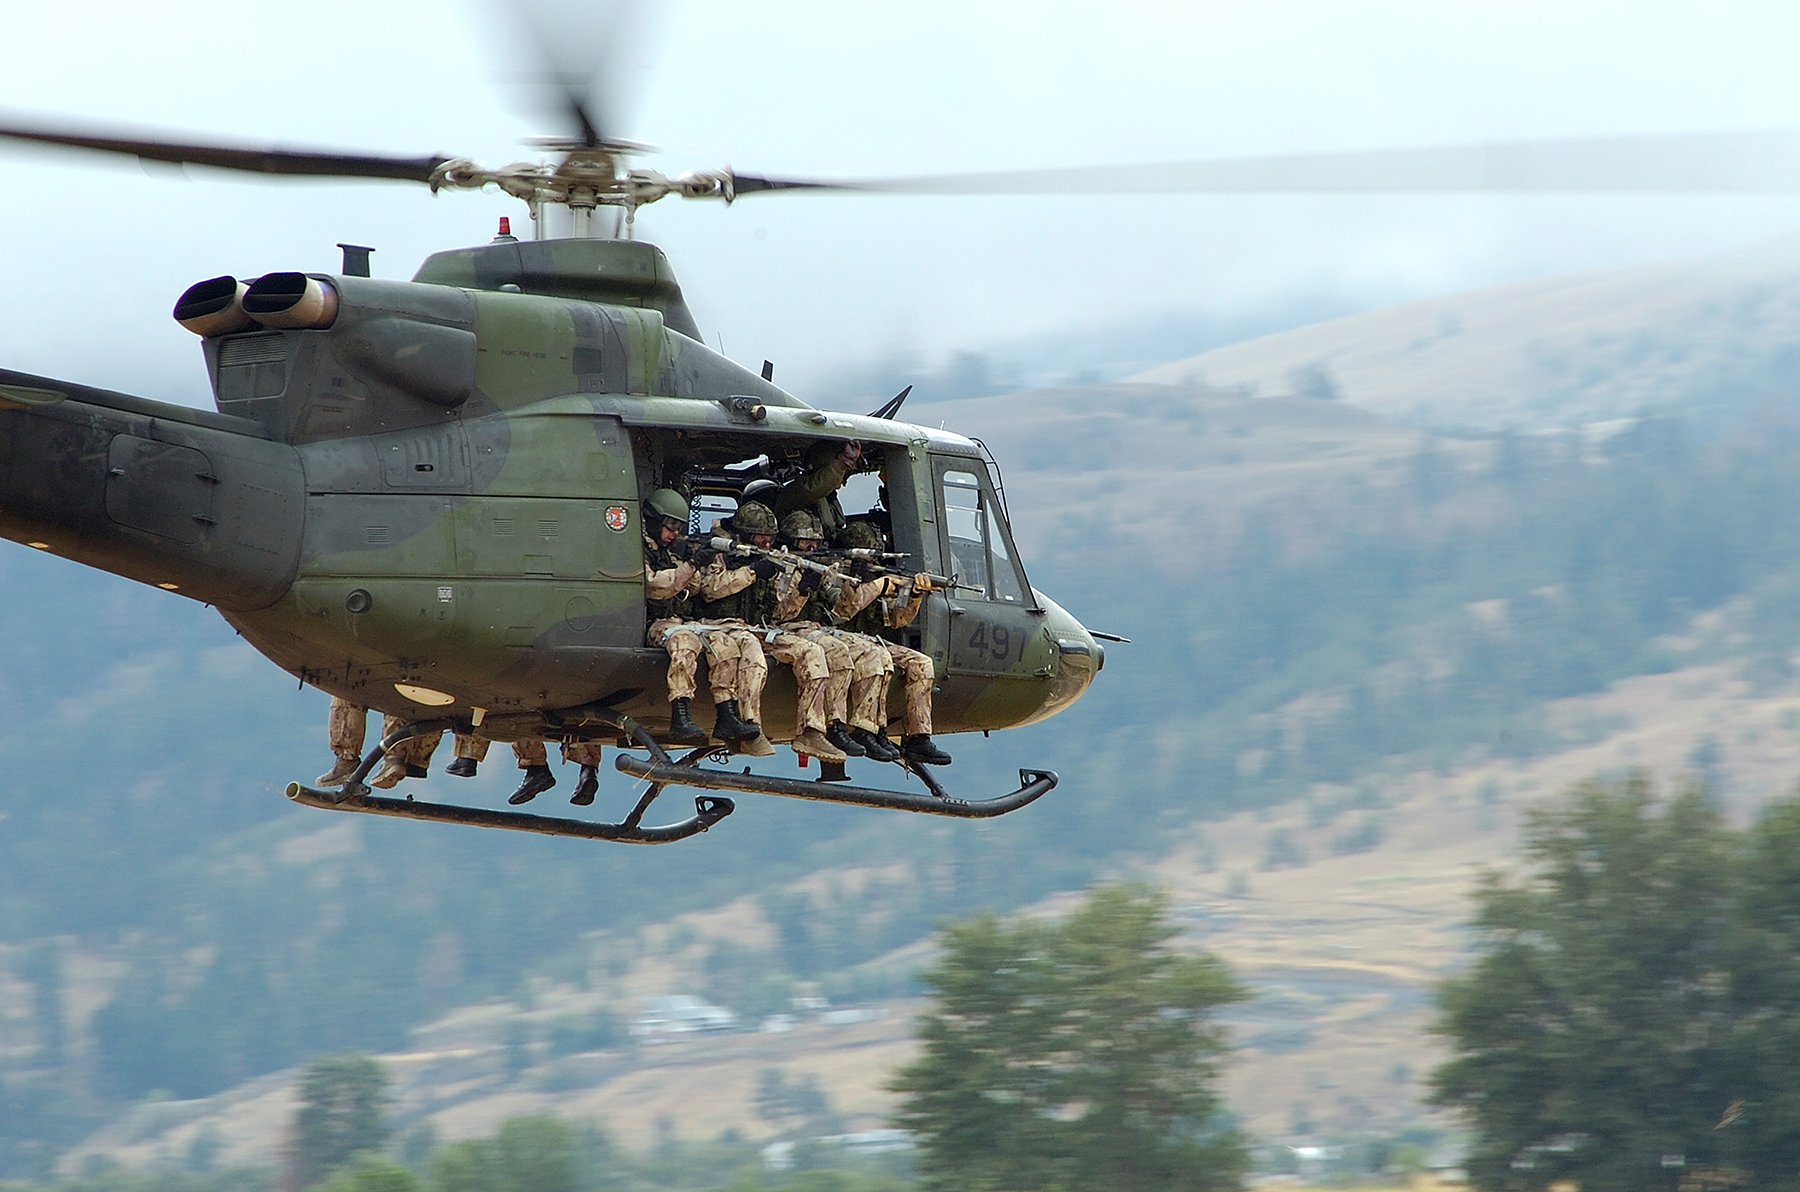 Troops from the Canadian Special Operations Regiment return to the forward operating base aboard a CH-146 Griffon helicopter from 427 Special Operations Aviation Squadron on July 20, 2006, during a training exercise near Kamloops, British Columbia. PHOTO: Sergeant Donald Clark, LW2006-5223d